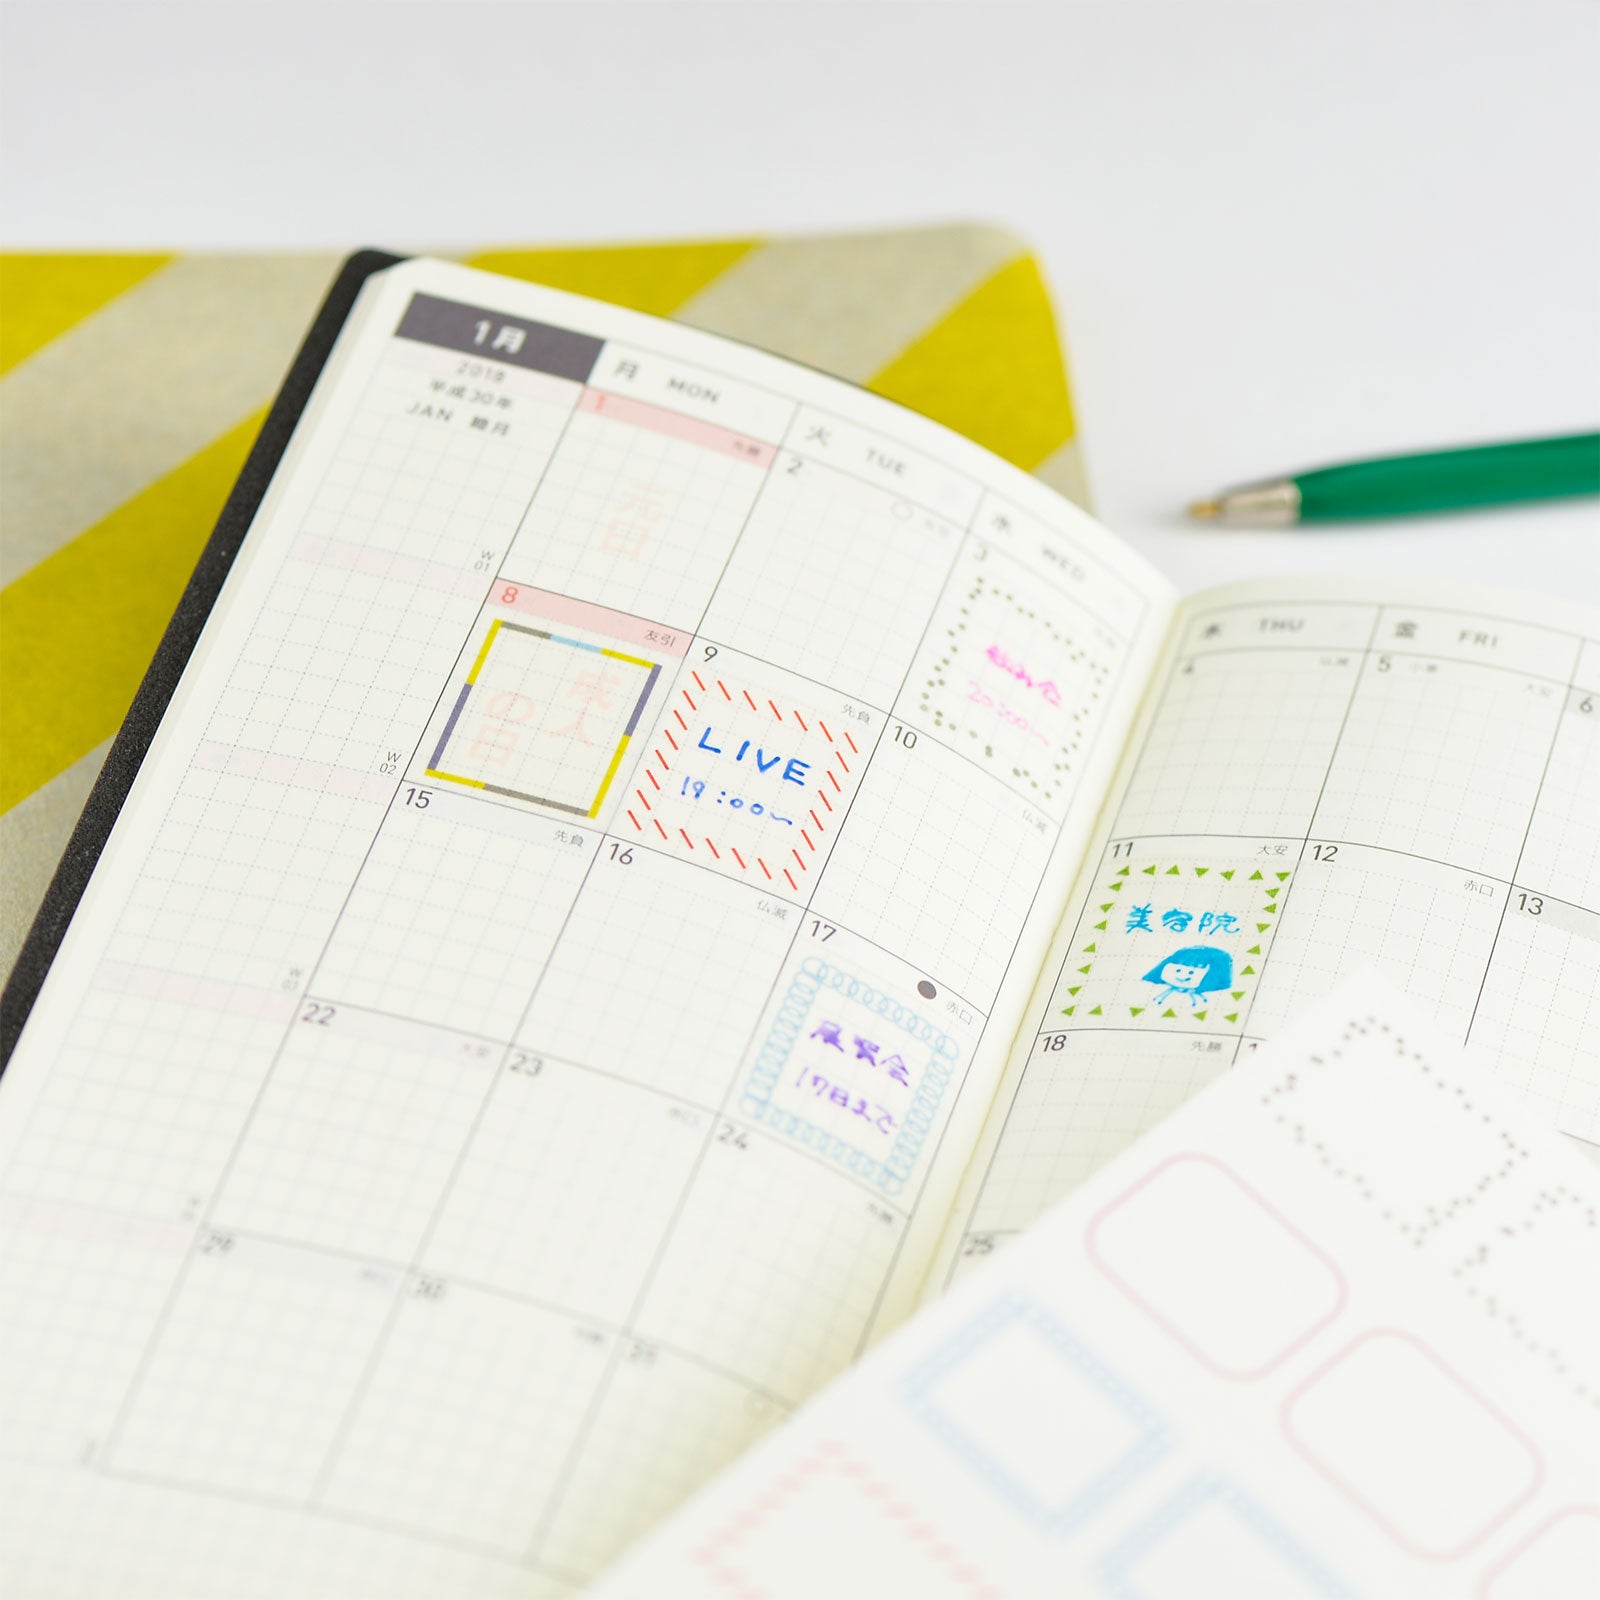 Hobonichi Frame Stickers This set of frame stickers is designed to perfectly fit the Japanese A6 Hobonichi Techo Original monthly calendar. The stickers come in several designs to make your pages pop. Stickers also come in larger “daily page” sizes to fit frames onto the daily pages.